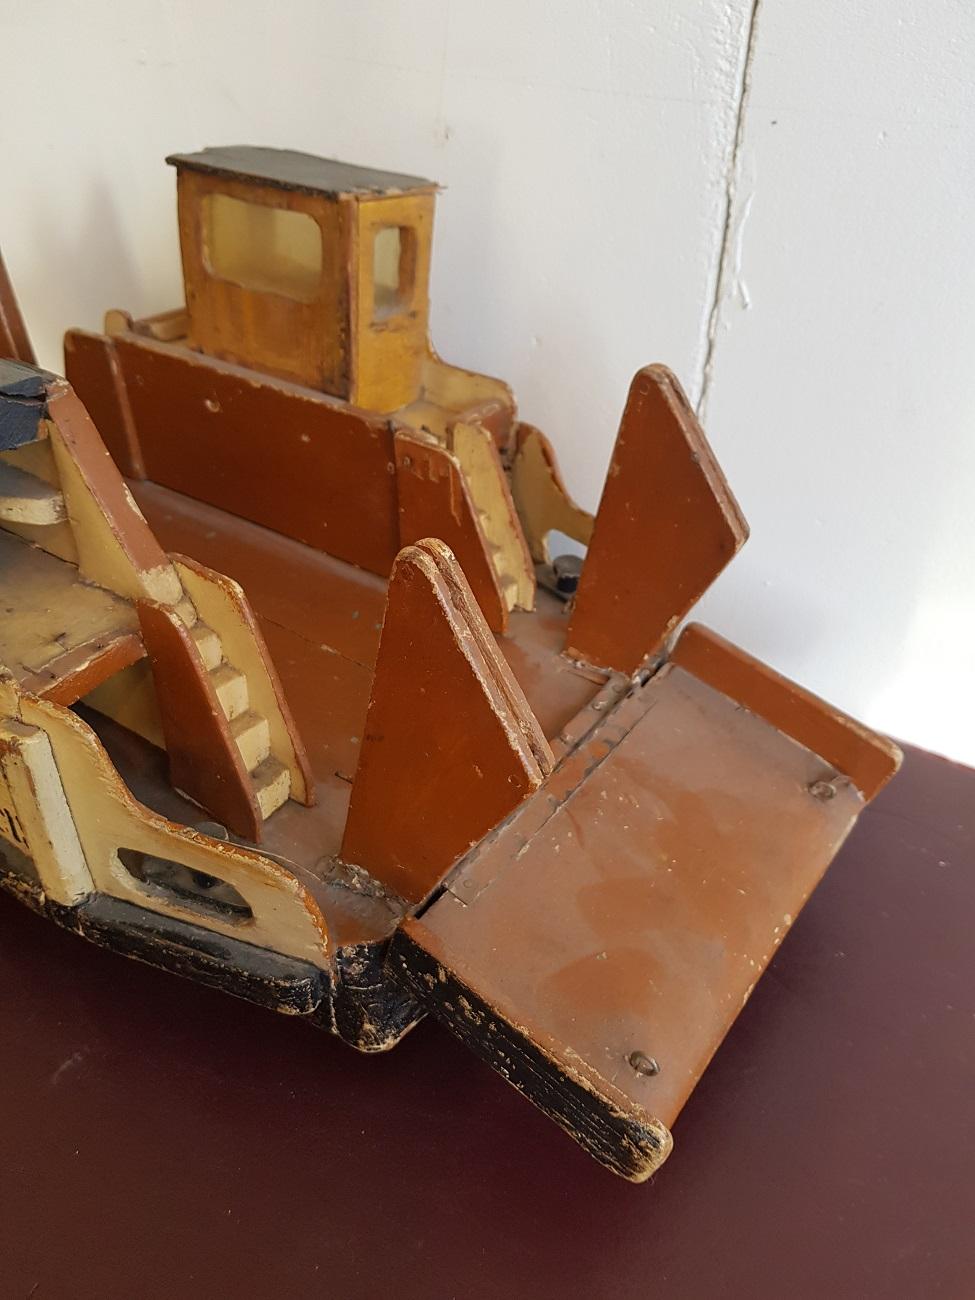 Hand-Crafted 1930s Homemade Dutch Wooden Toy Ferry After a Model That Sailed at Amsterdam